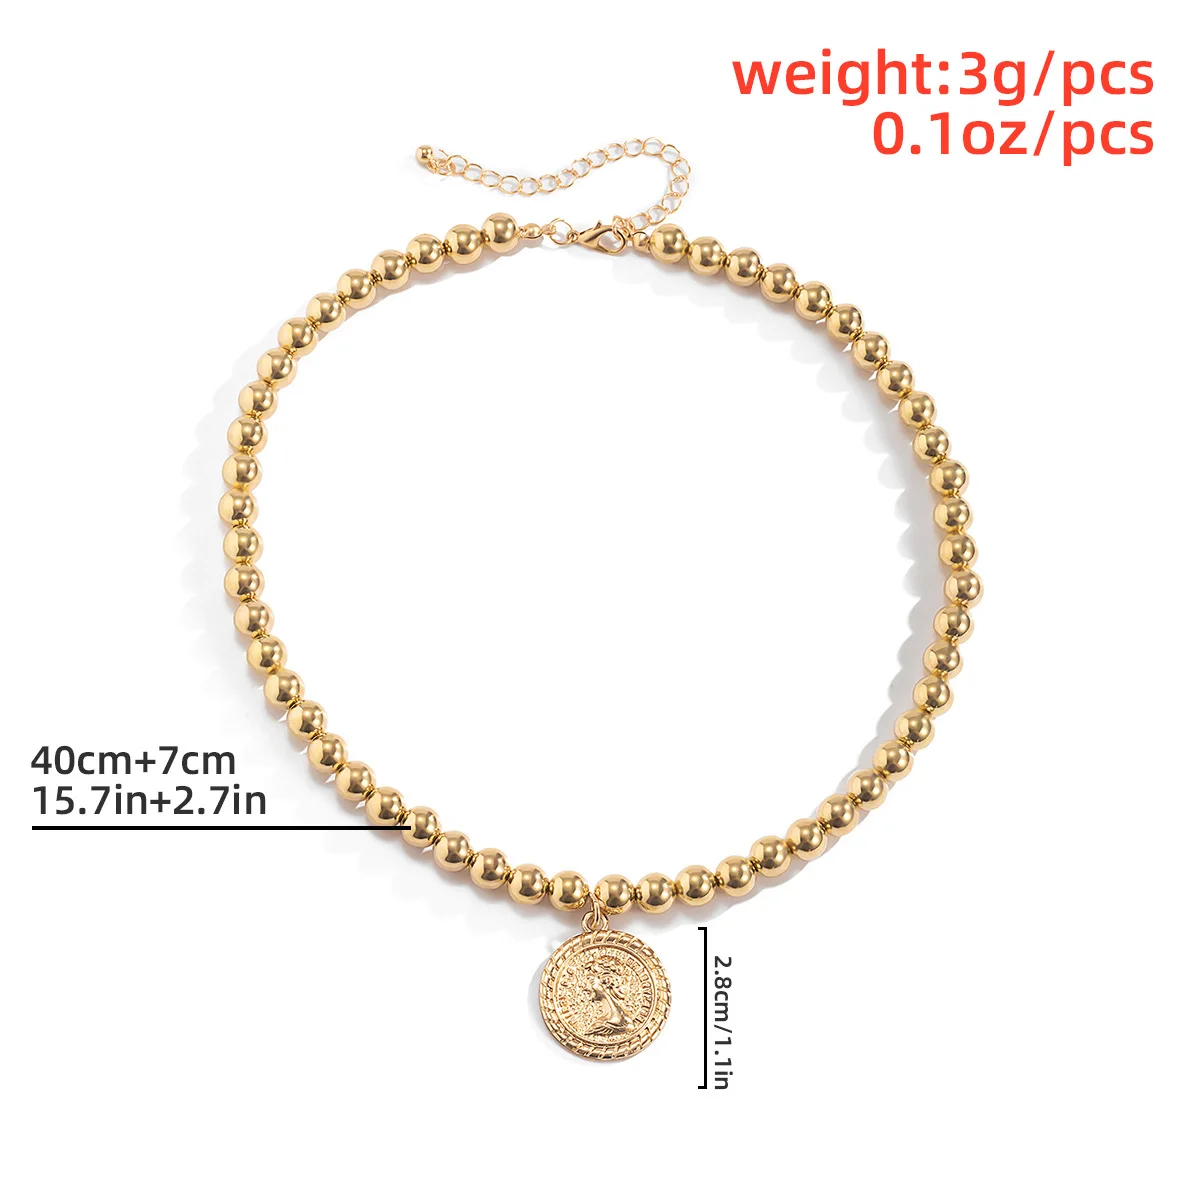 custom diy lady pearl pendant necklace,multilayer charm chain gold plated women necklaces jewelry